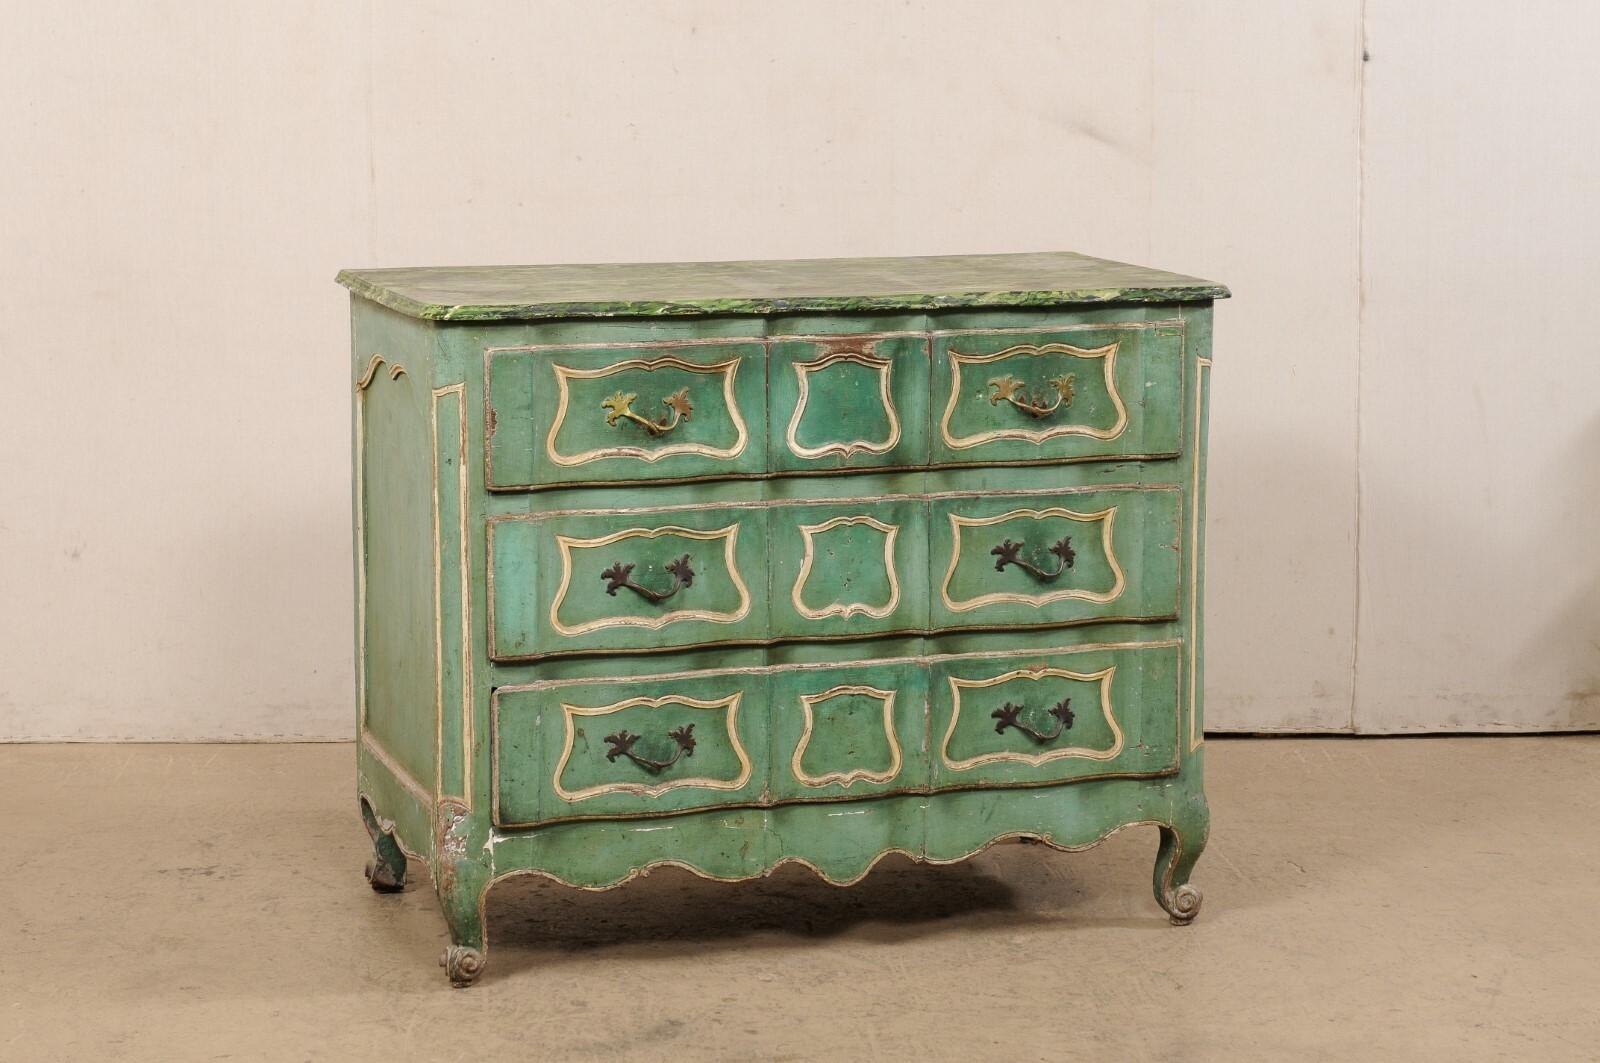 A French Rococo period painted commode from the 18th century. This antique chest from France has a faux-marbled and serpentine-fronted top, with case below continuing the design downward, and housing three dove-tailed, full-sized drawers. Drawer